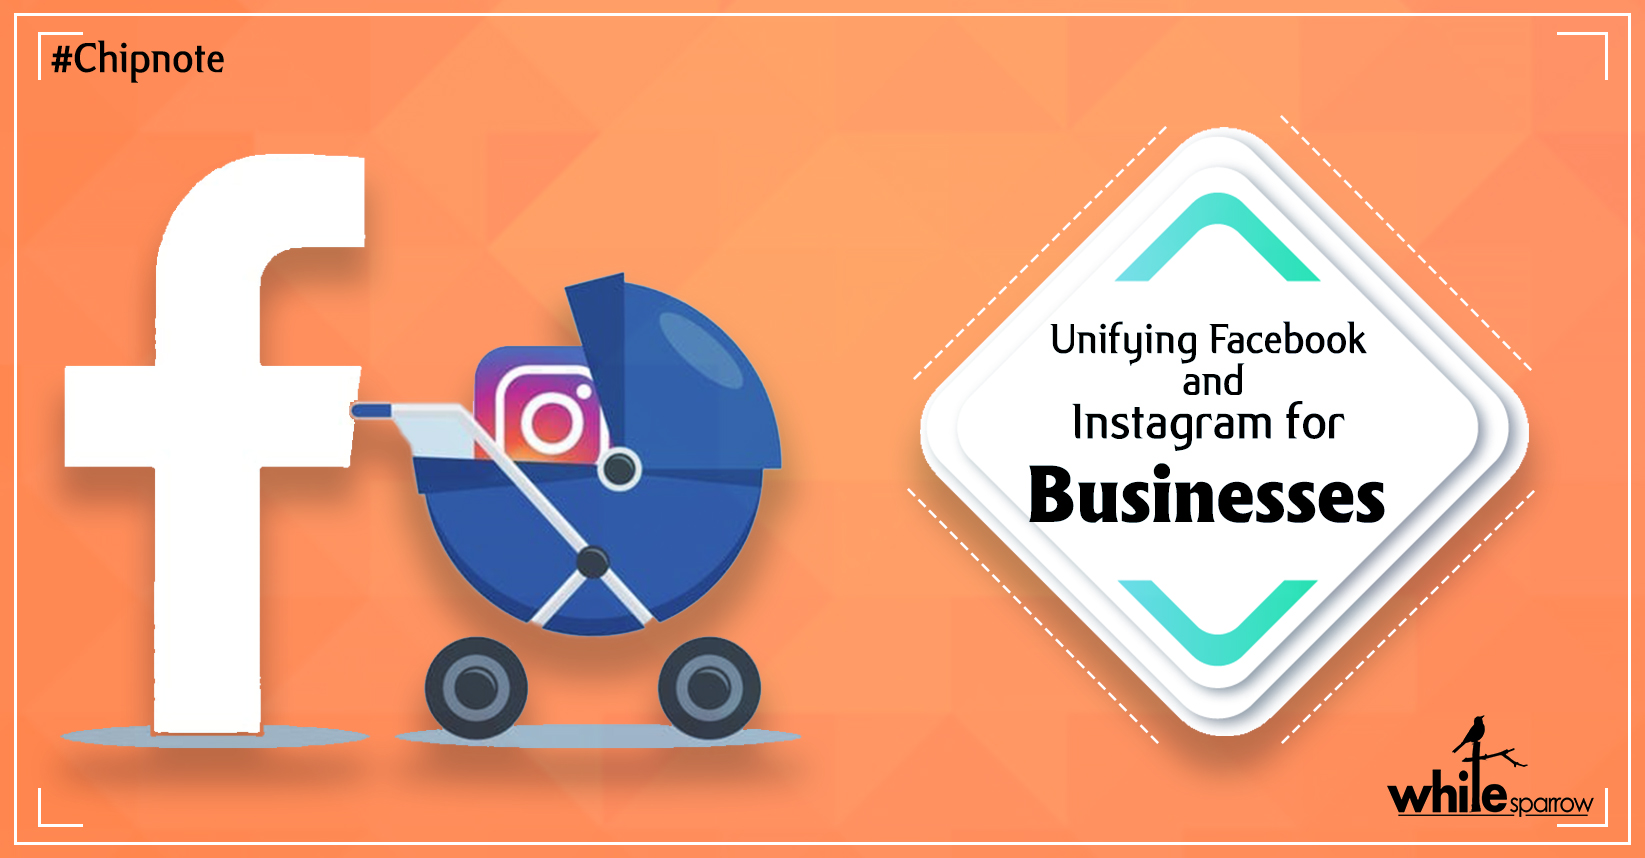 Unifying Facebook and Instagram for businesses